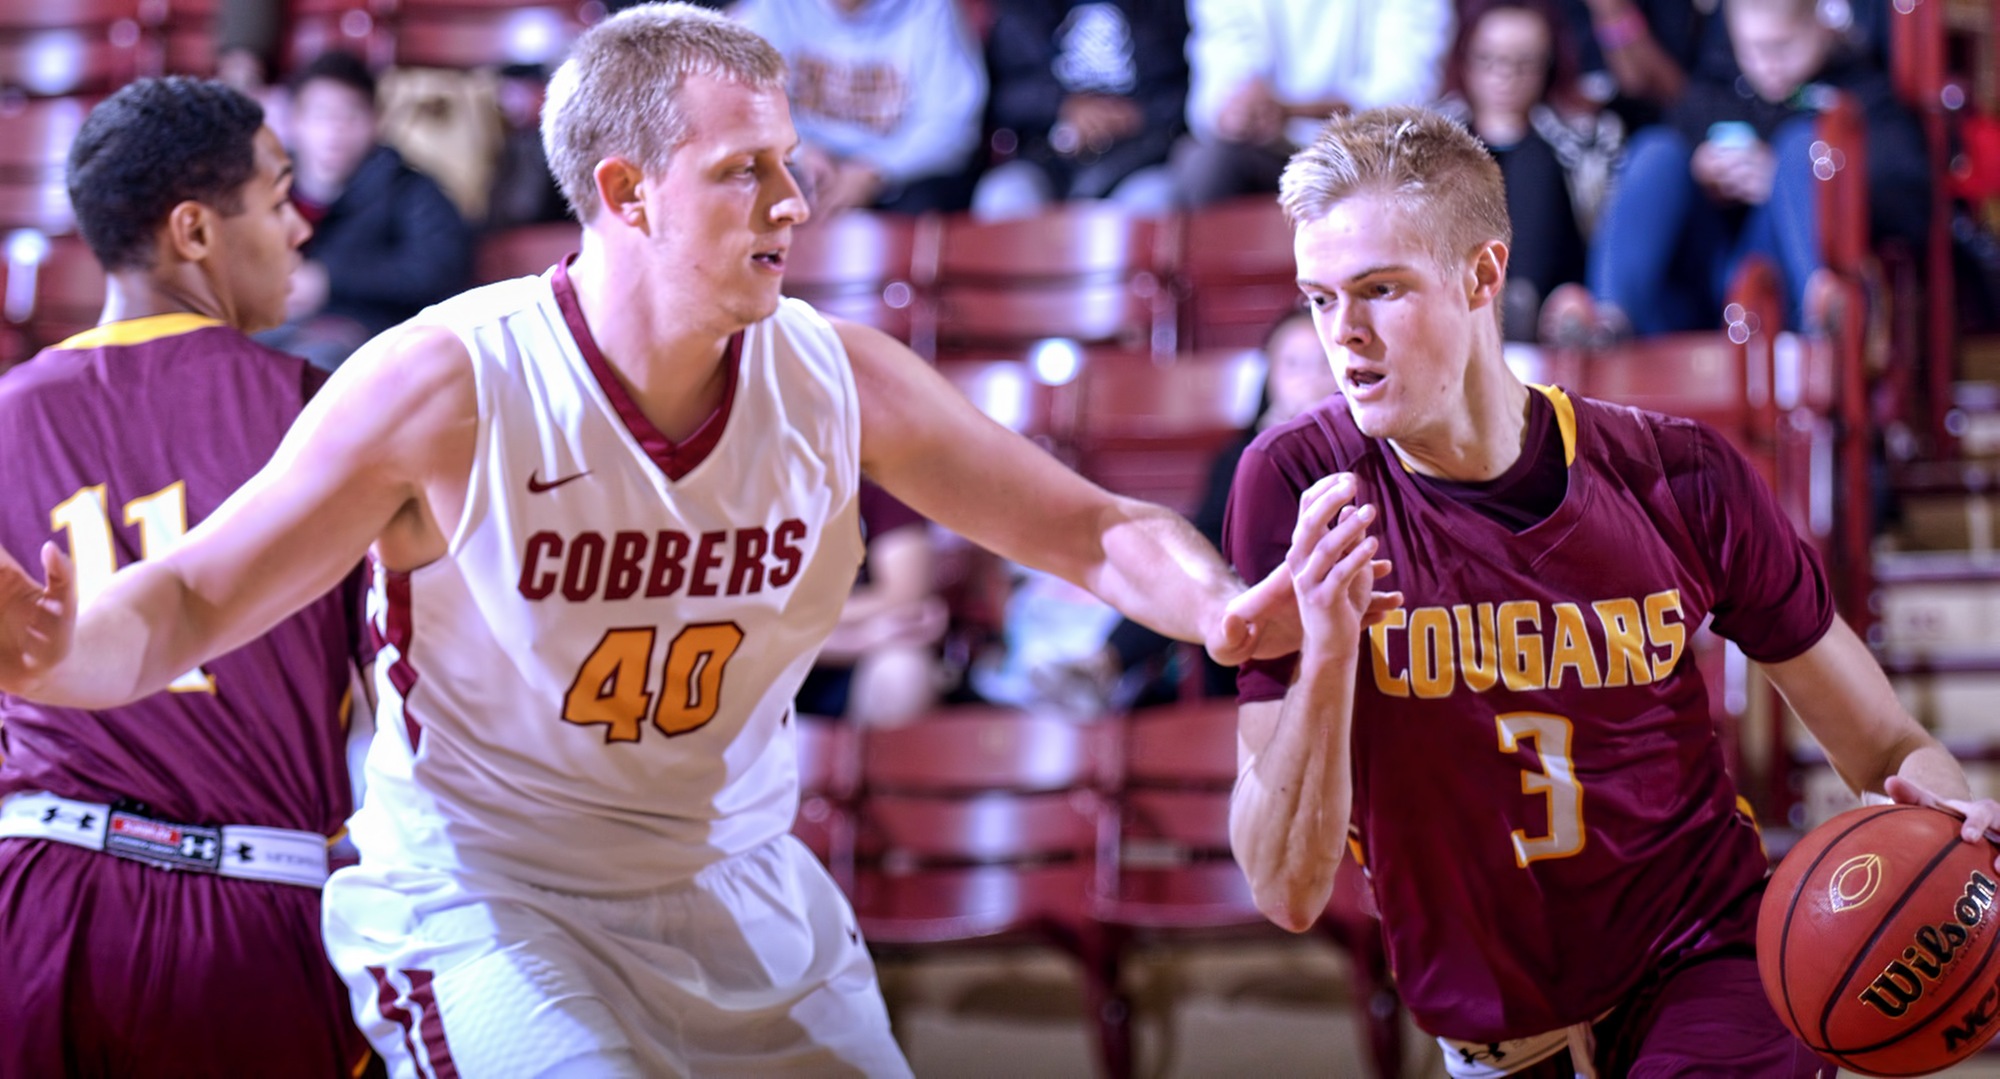 Concordia senior Austin Heins had career-high totals in points in rebounds as he helped the Cobbers' earn an 80-71 win over Minn.-Morris in the season opener.